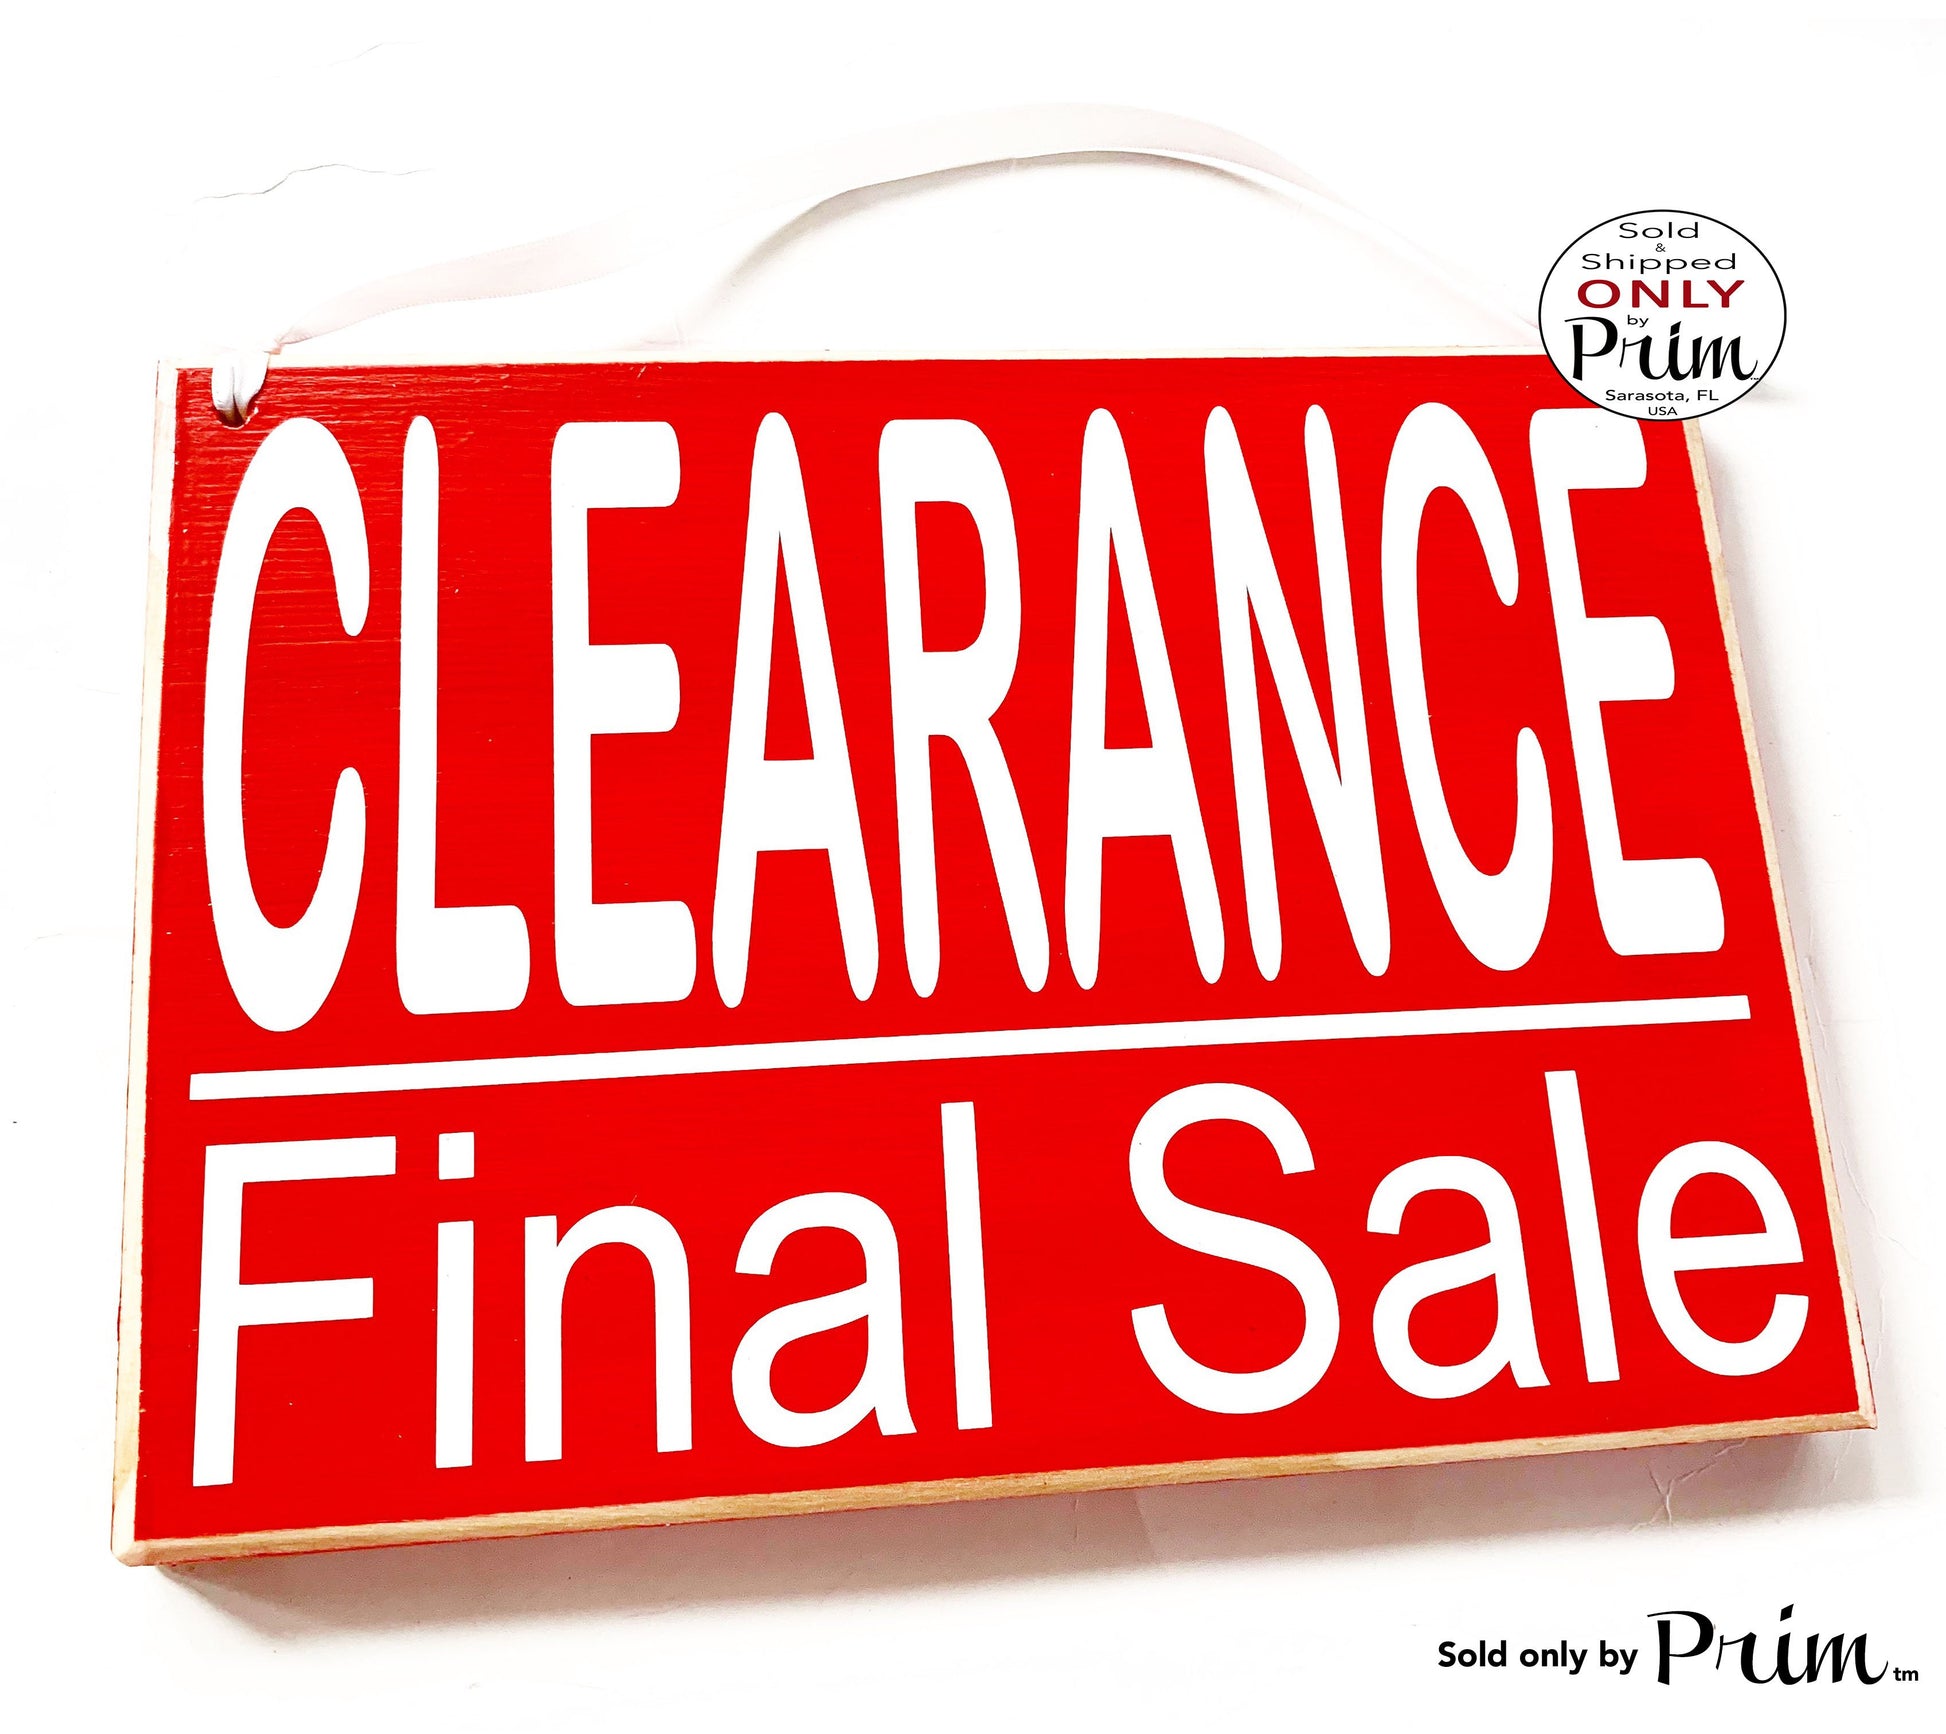 10x8 Clearance Final Sale Custom Wood Sign Boutique Gift Shop Retail Clothing Store Business Merchandise Cashier Wall Rack Plaque